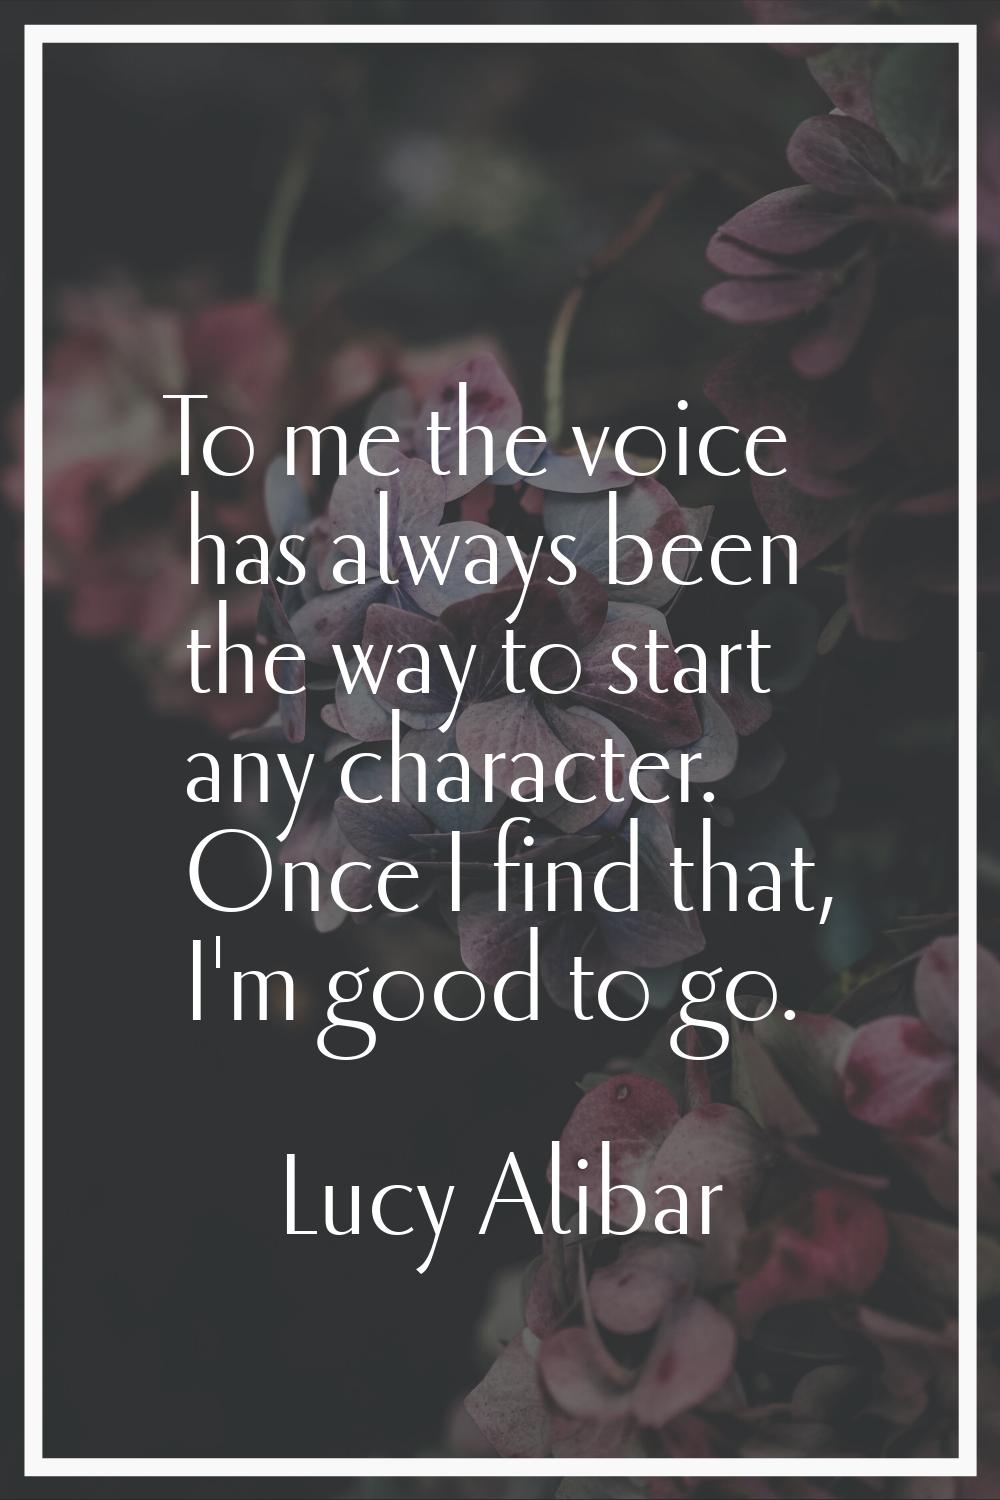 To me the voice has always been the way to start any character. Once I find that, I'm good to go.